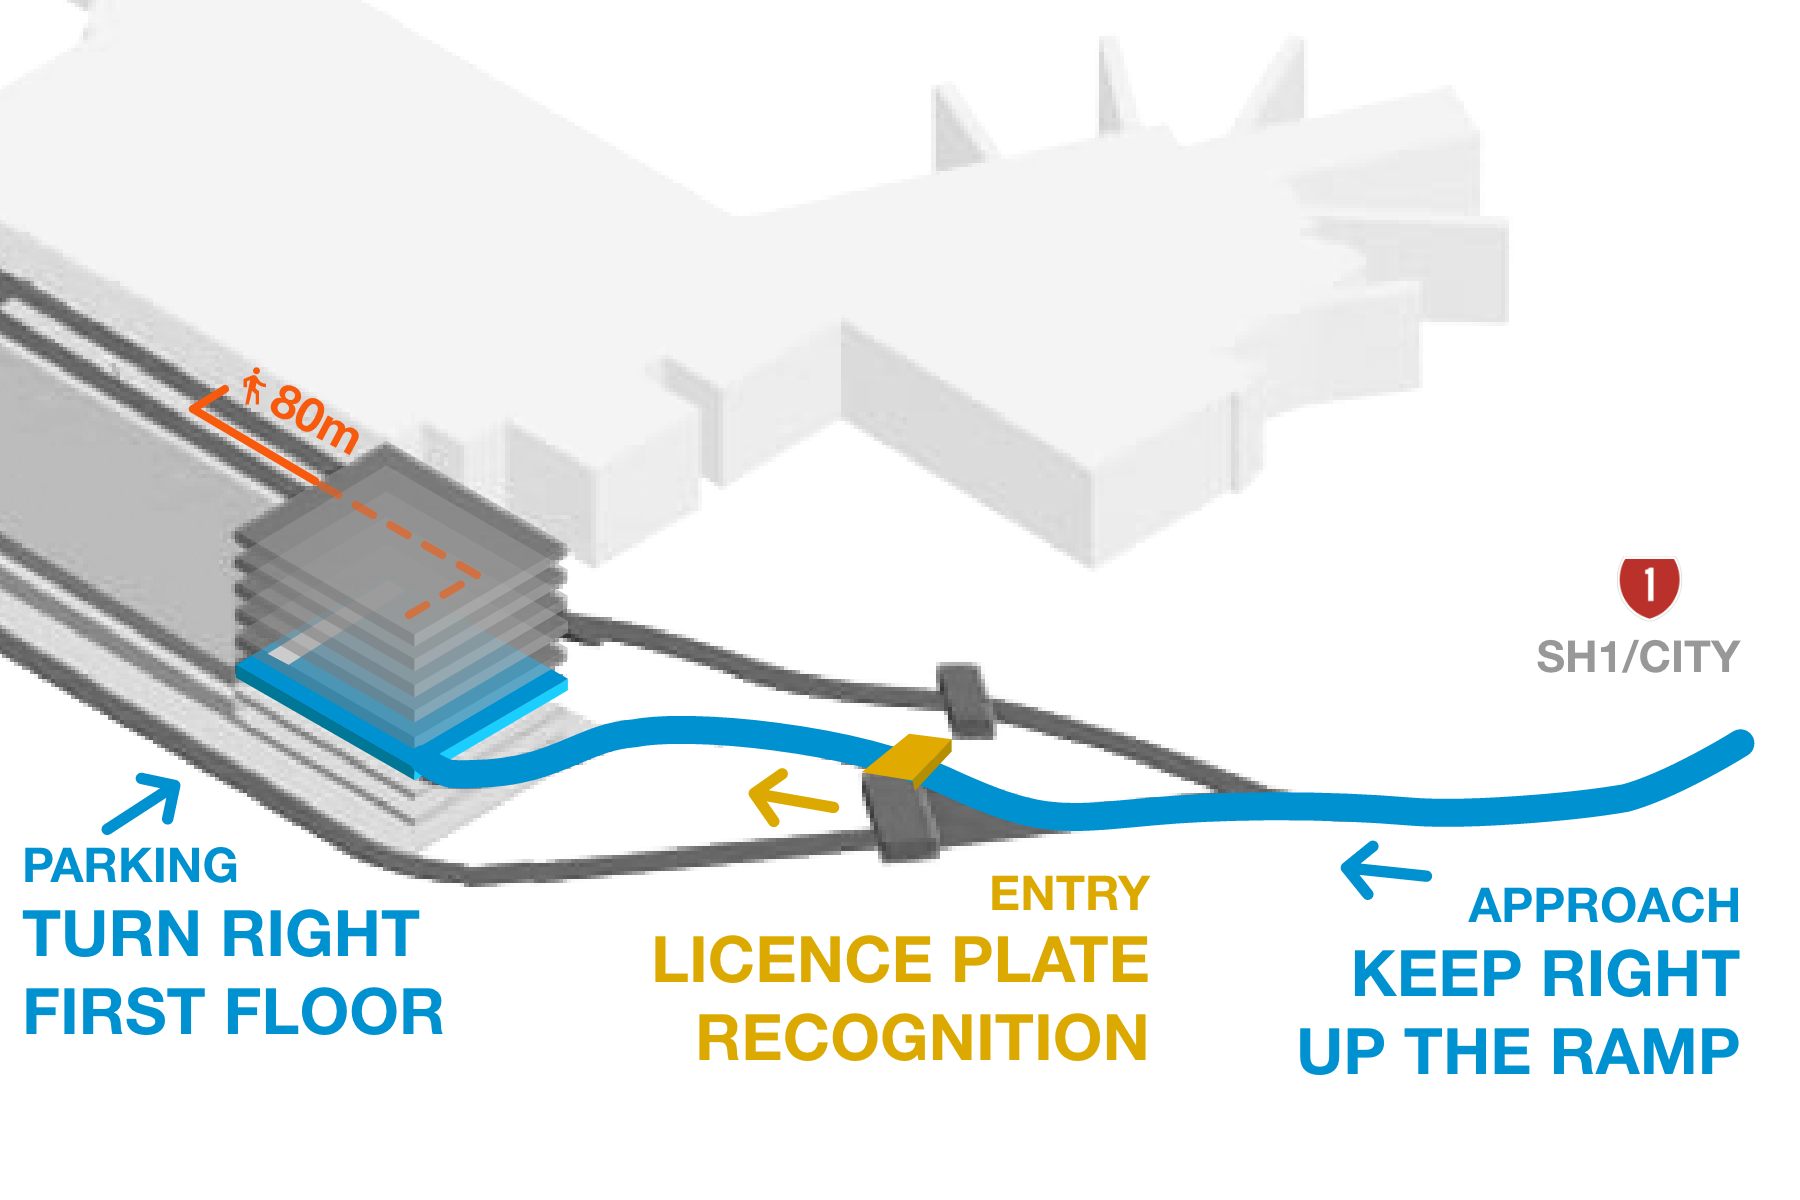 Map illustrating how to access parking at the airport